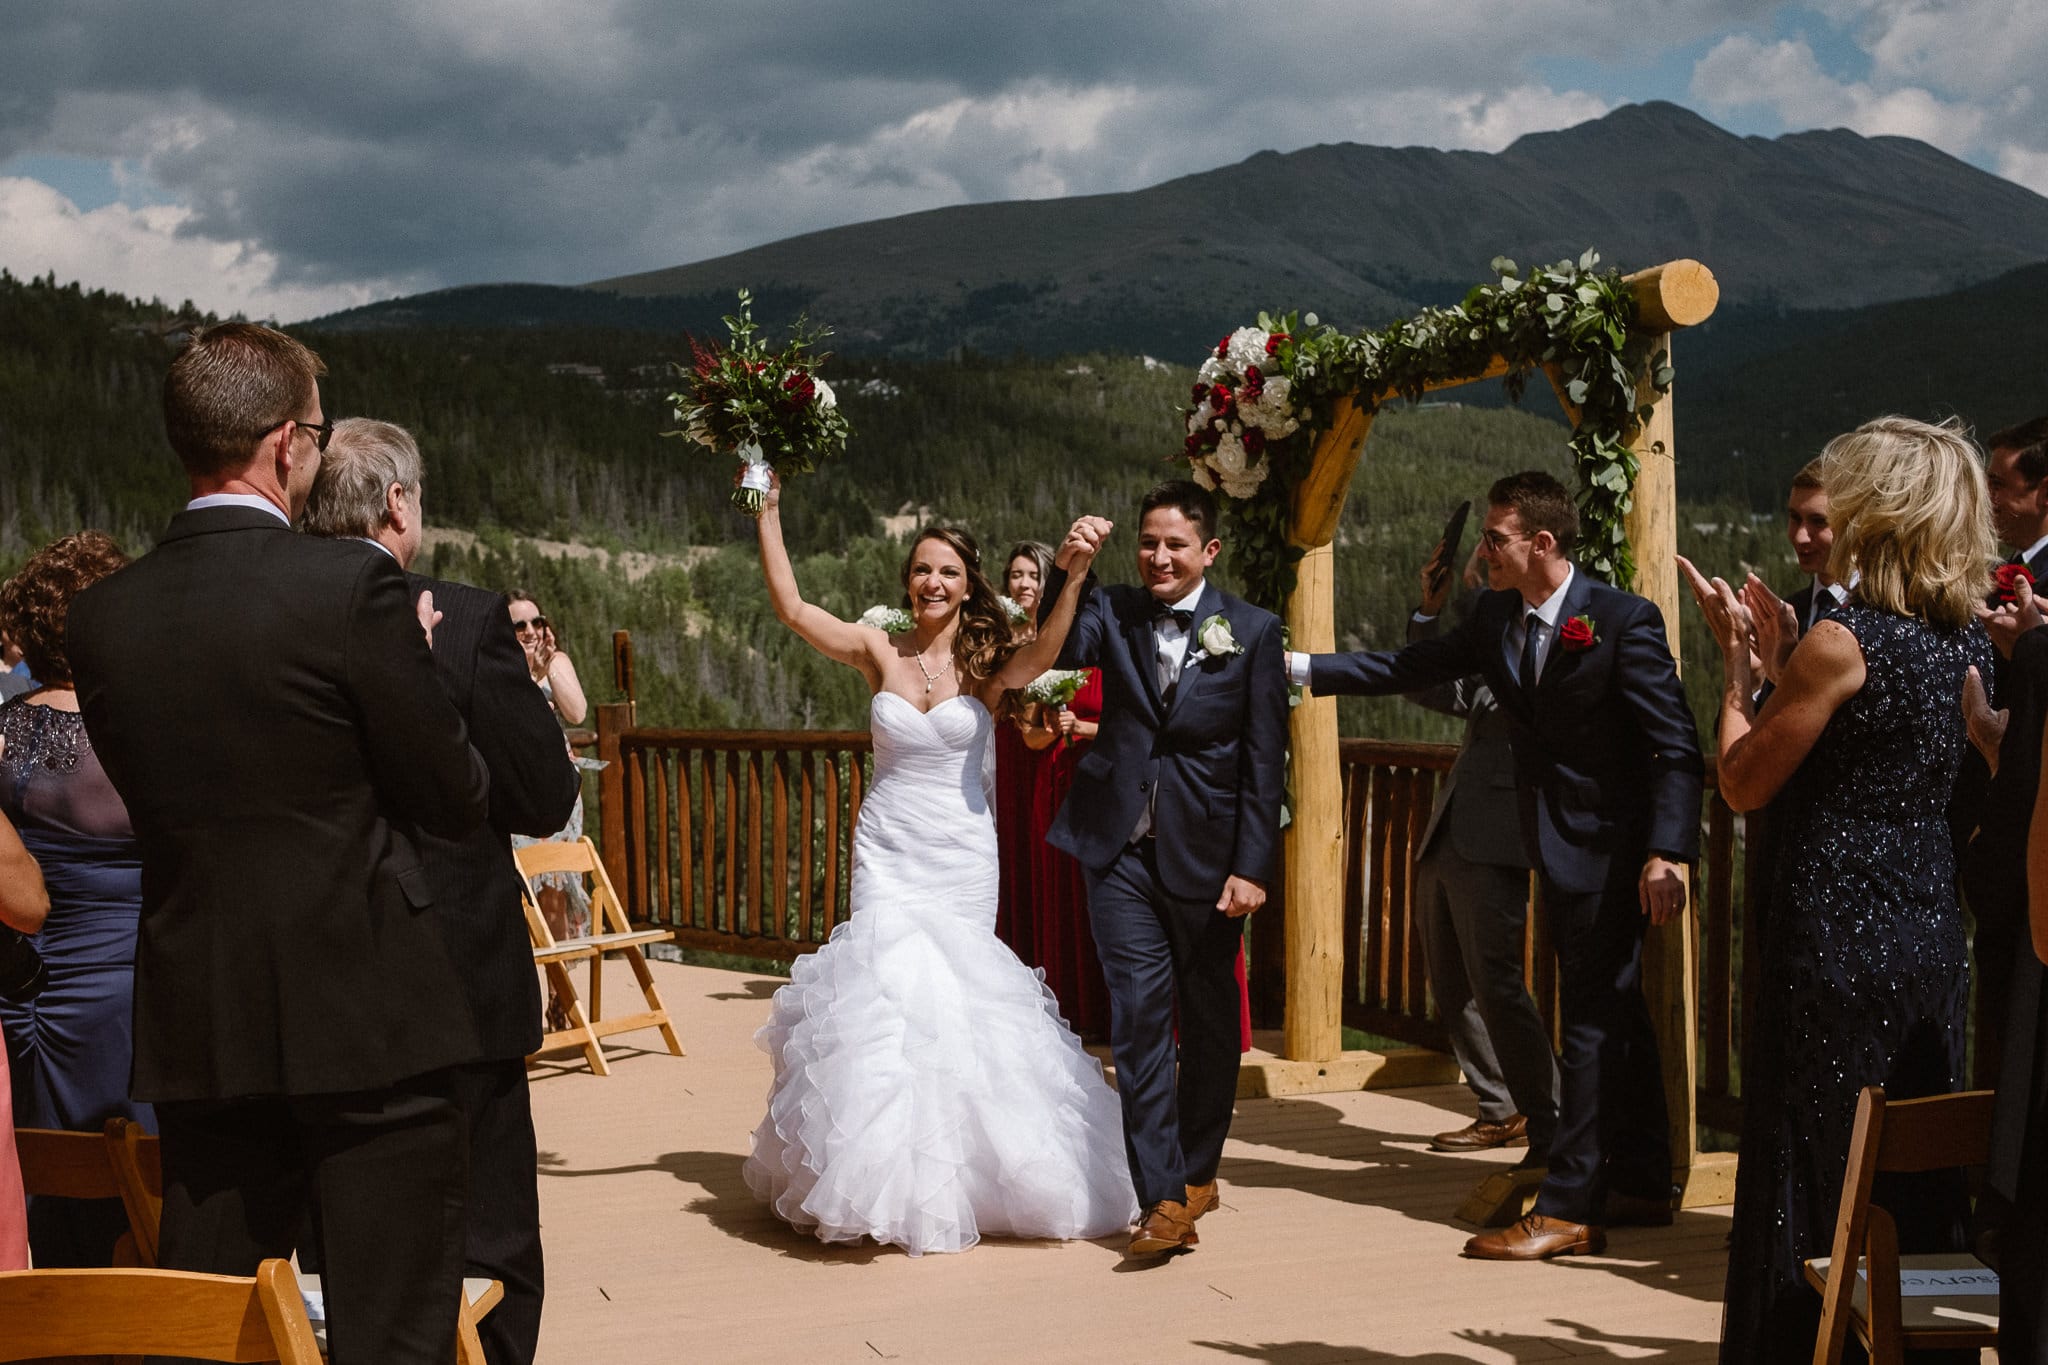 Lodge at Breckenridge Wedding Photographer, Colorado mountain wedding photographer, intimate wedding ceremony on deck with mountain views, bride and groom celebrating, recessional